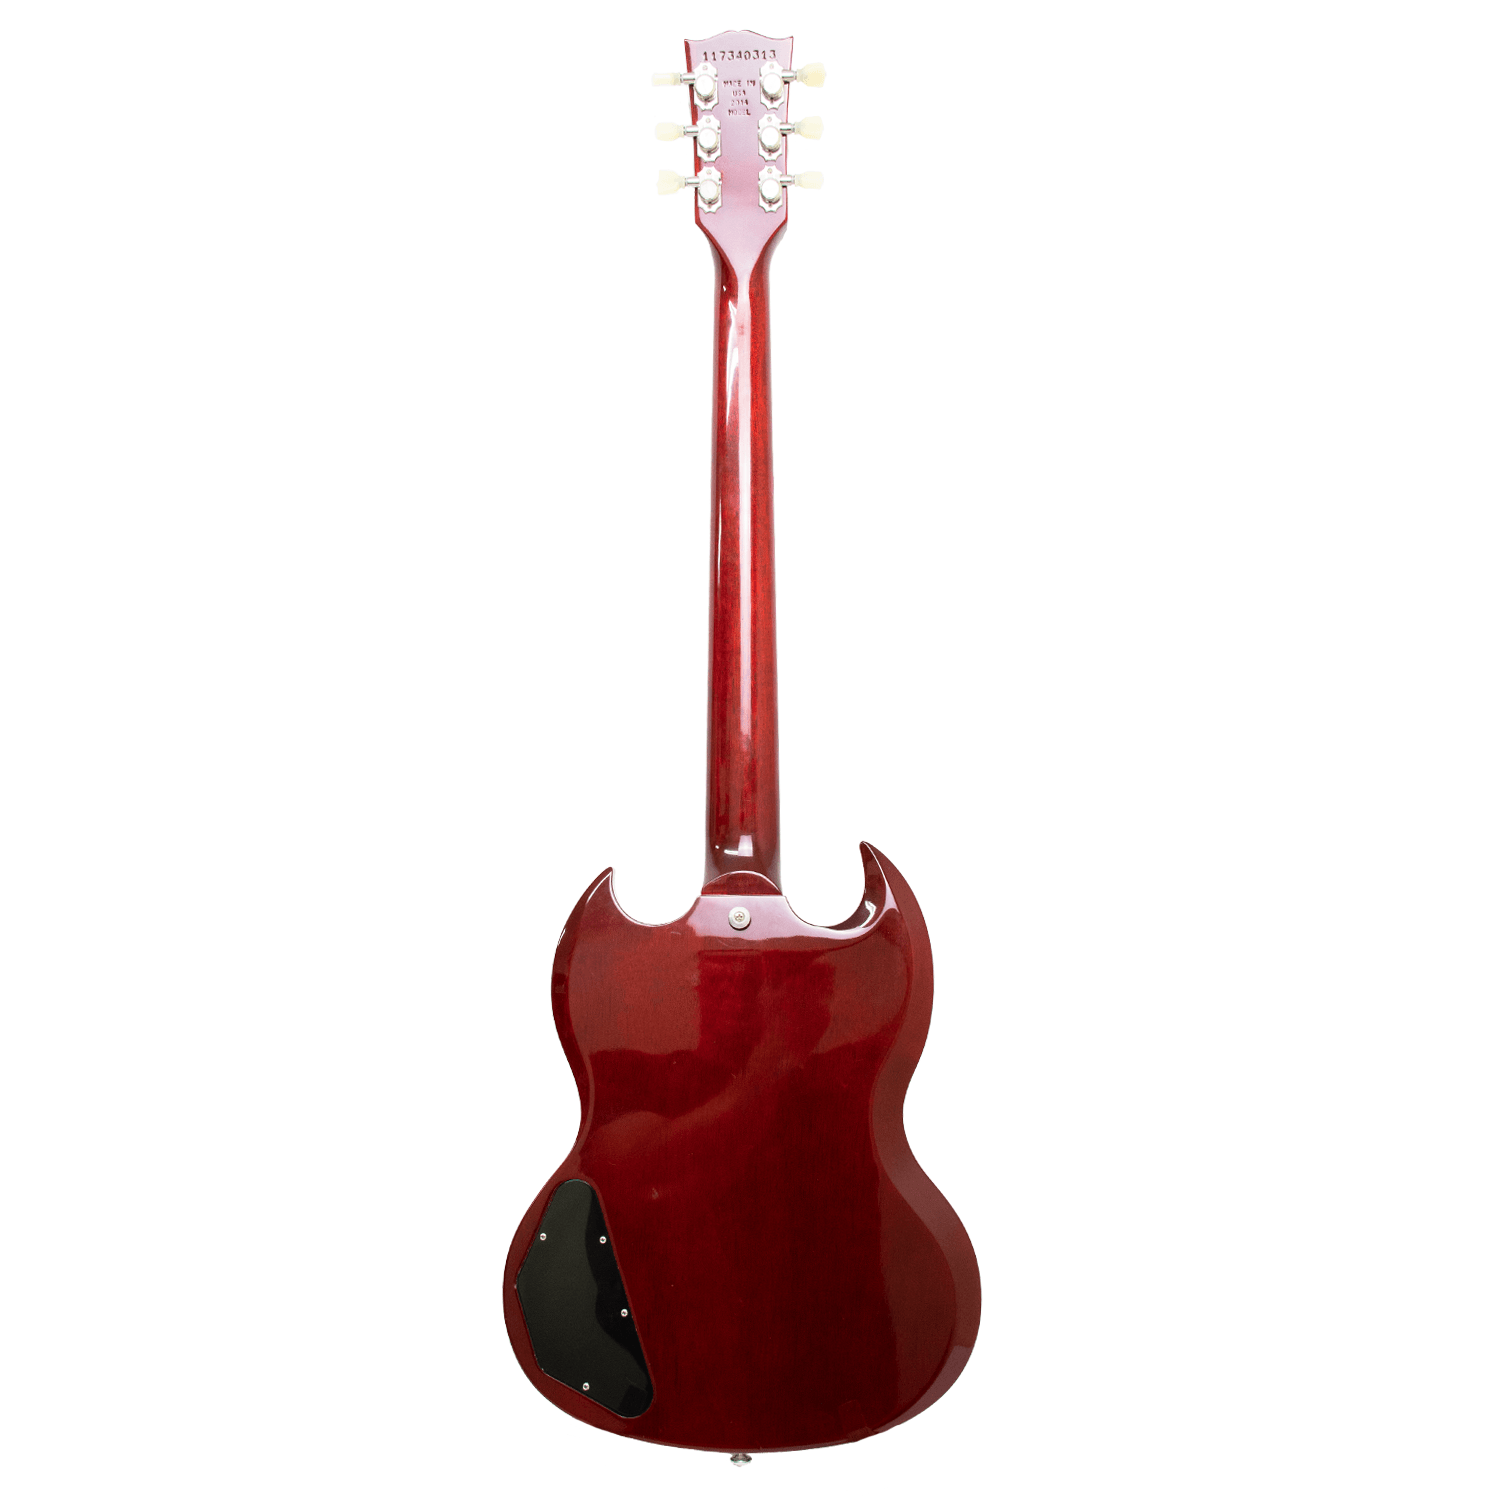 Gibson SG Red 1961 Electric Guitar - ipawnishop.com